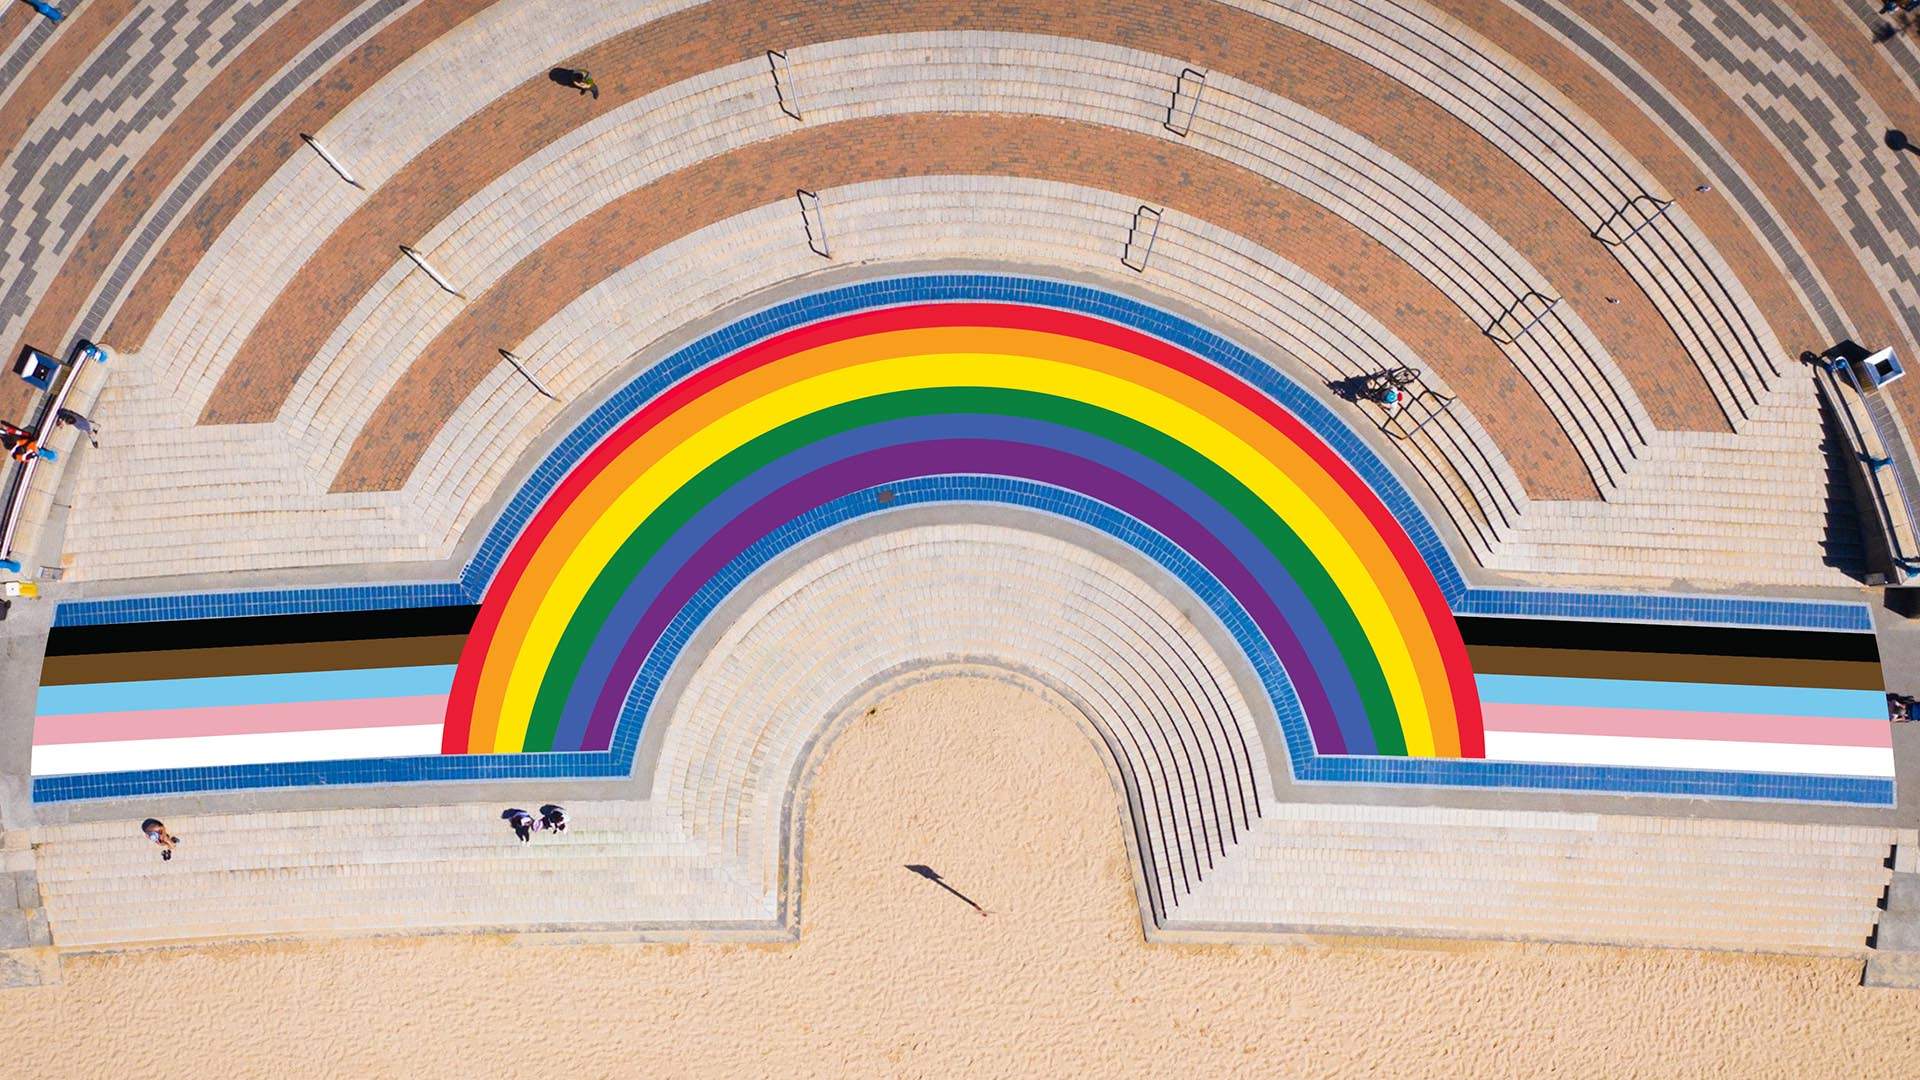 Greater Sydney Will Be Filled with Rainbow Artworks and Installations During WorldPride 2023